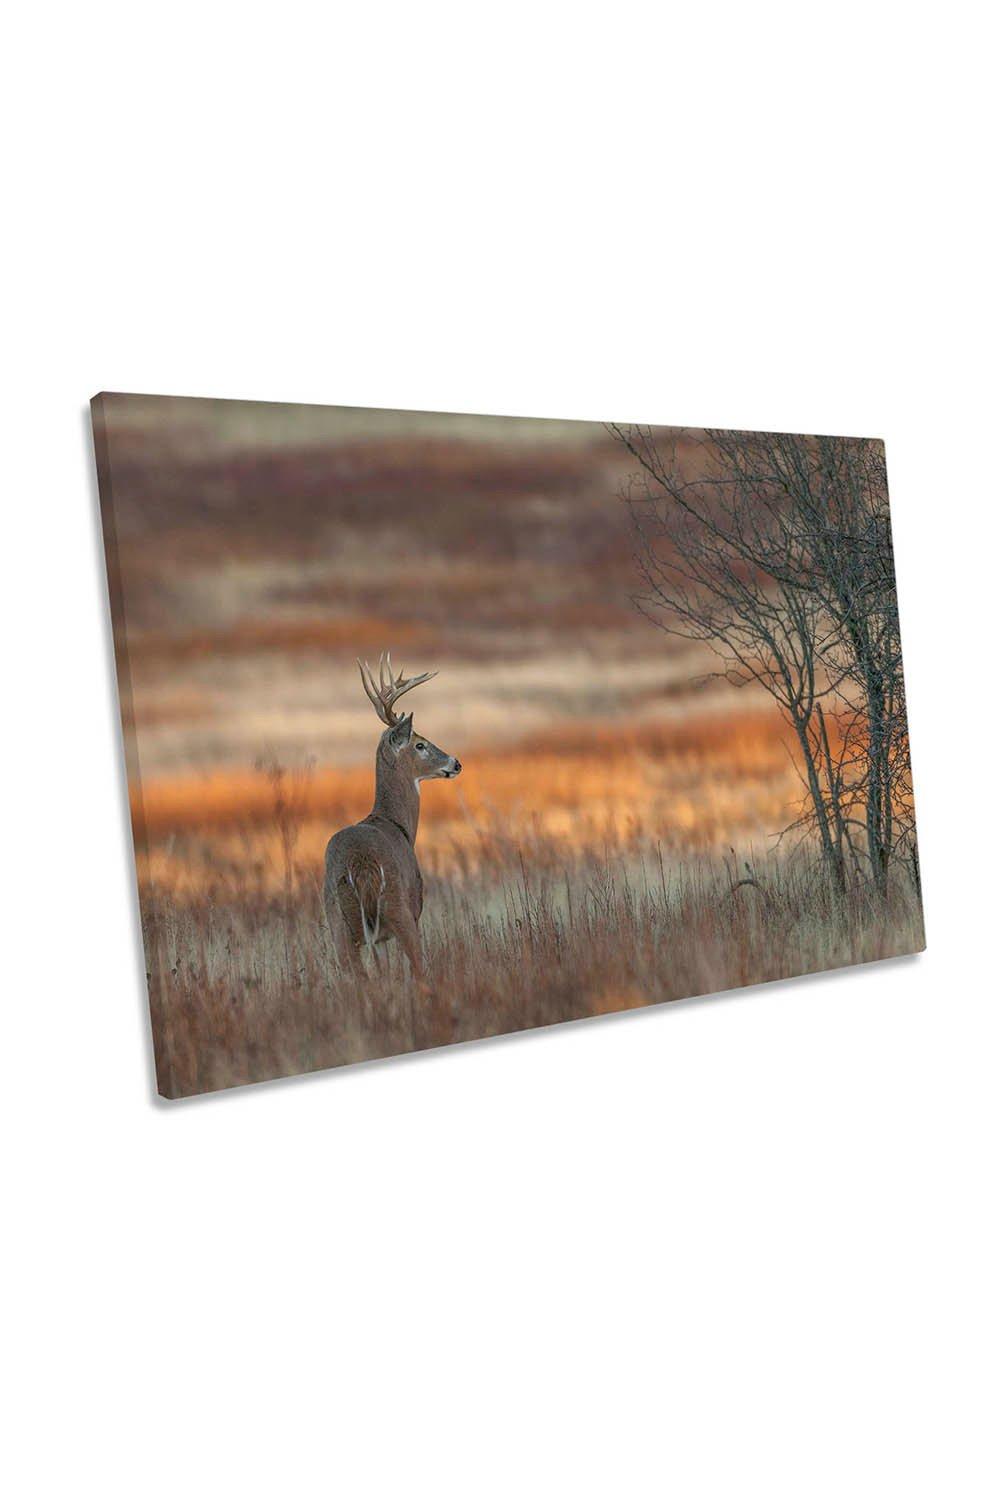 Last Light Whitetail Deer Antlers Canvas Wall Art Picture Print